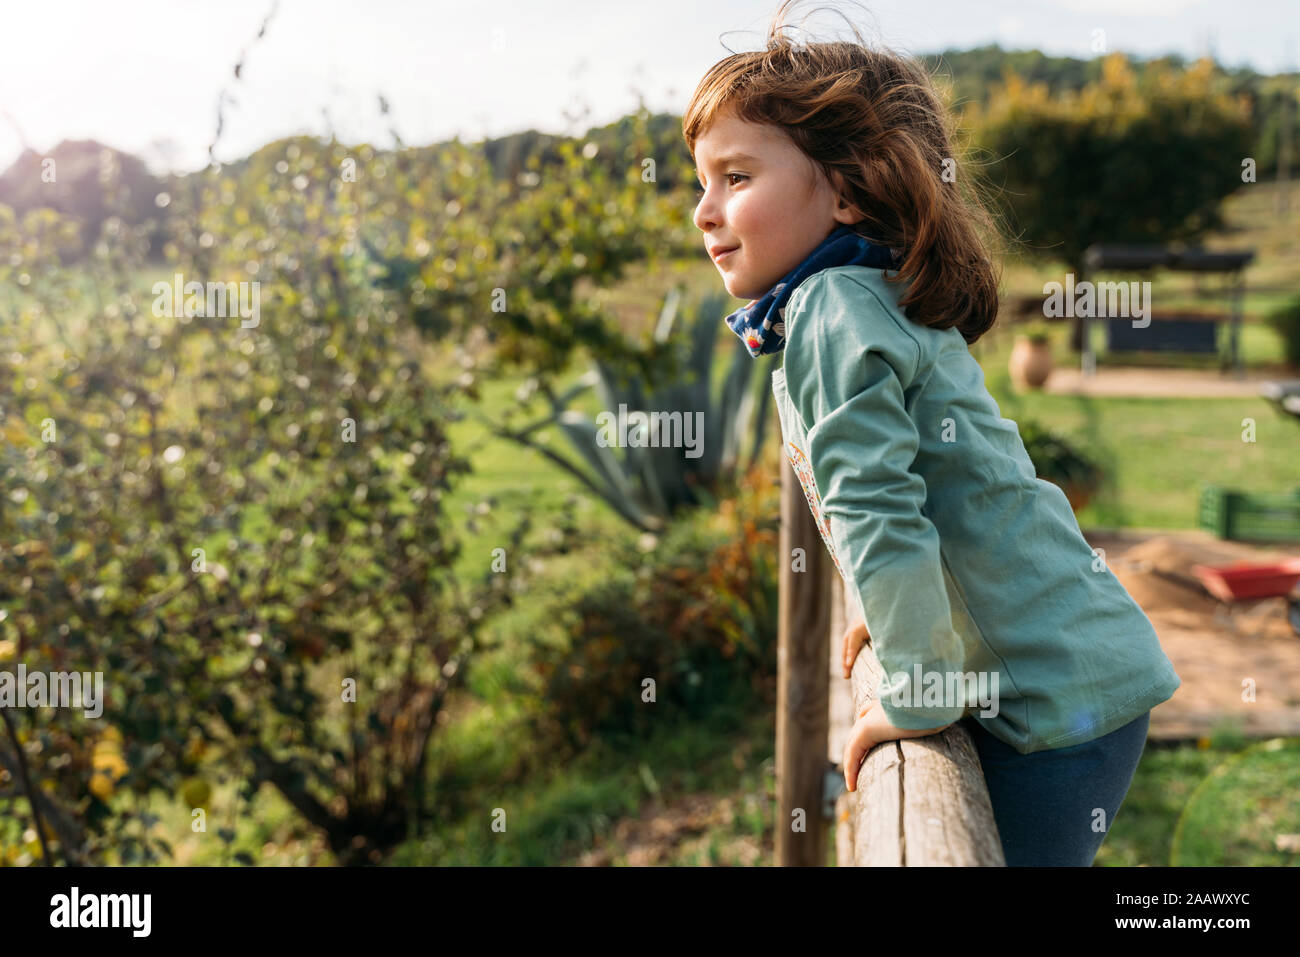 Portrait of smiling little girl leaning on wooden fence Stock Photo